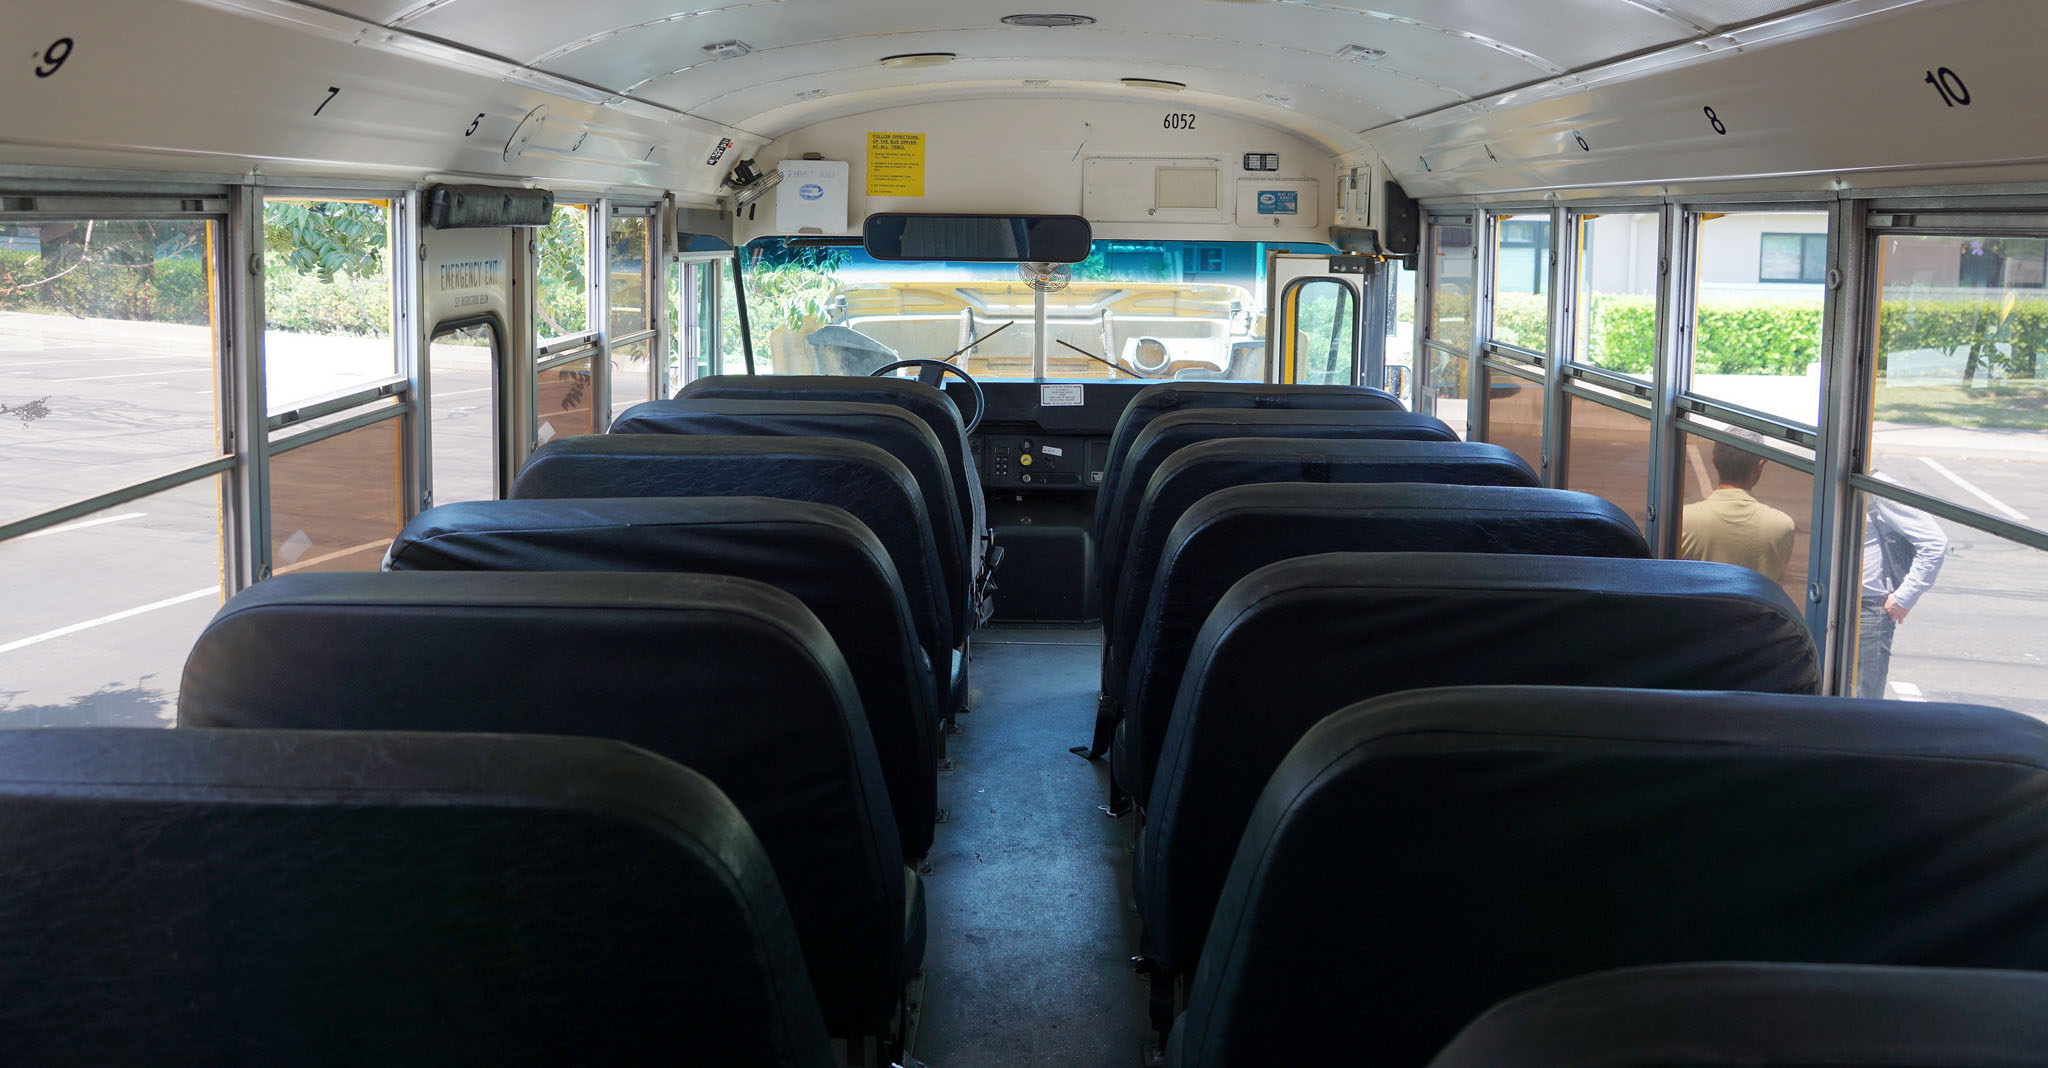 How School Buses Could Help Run Your Air Conditioning